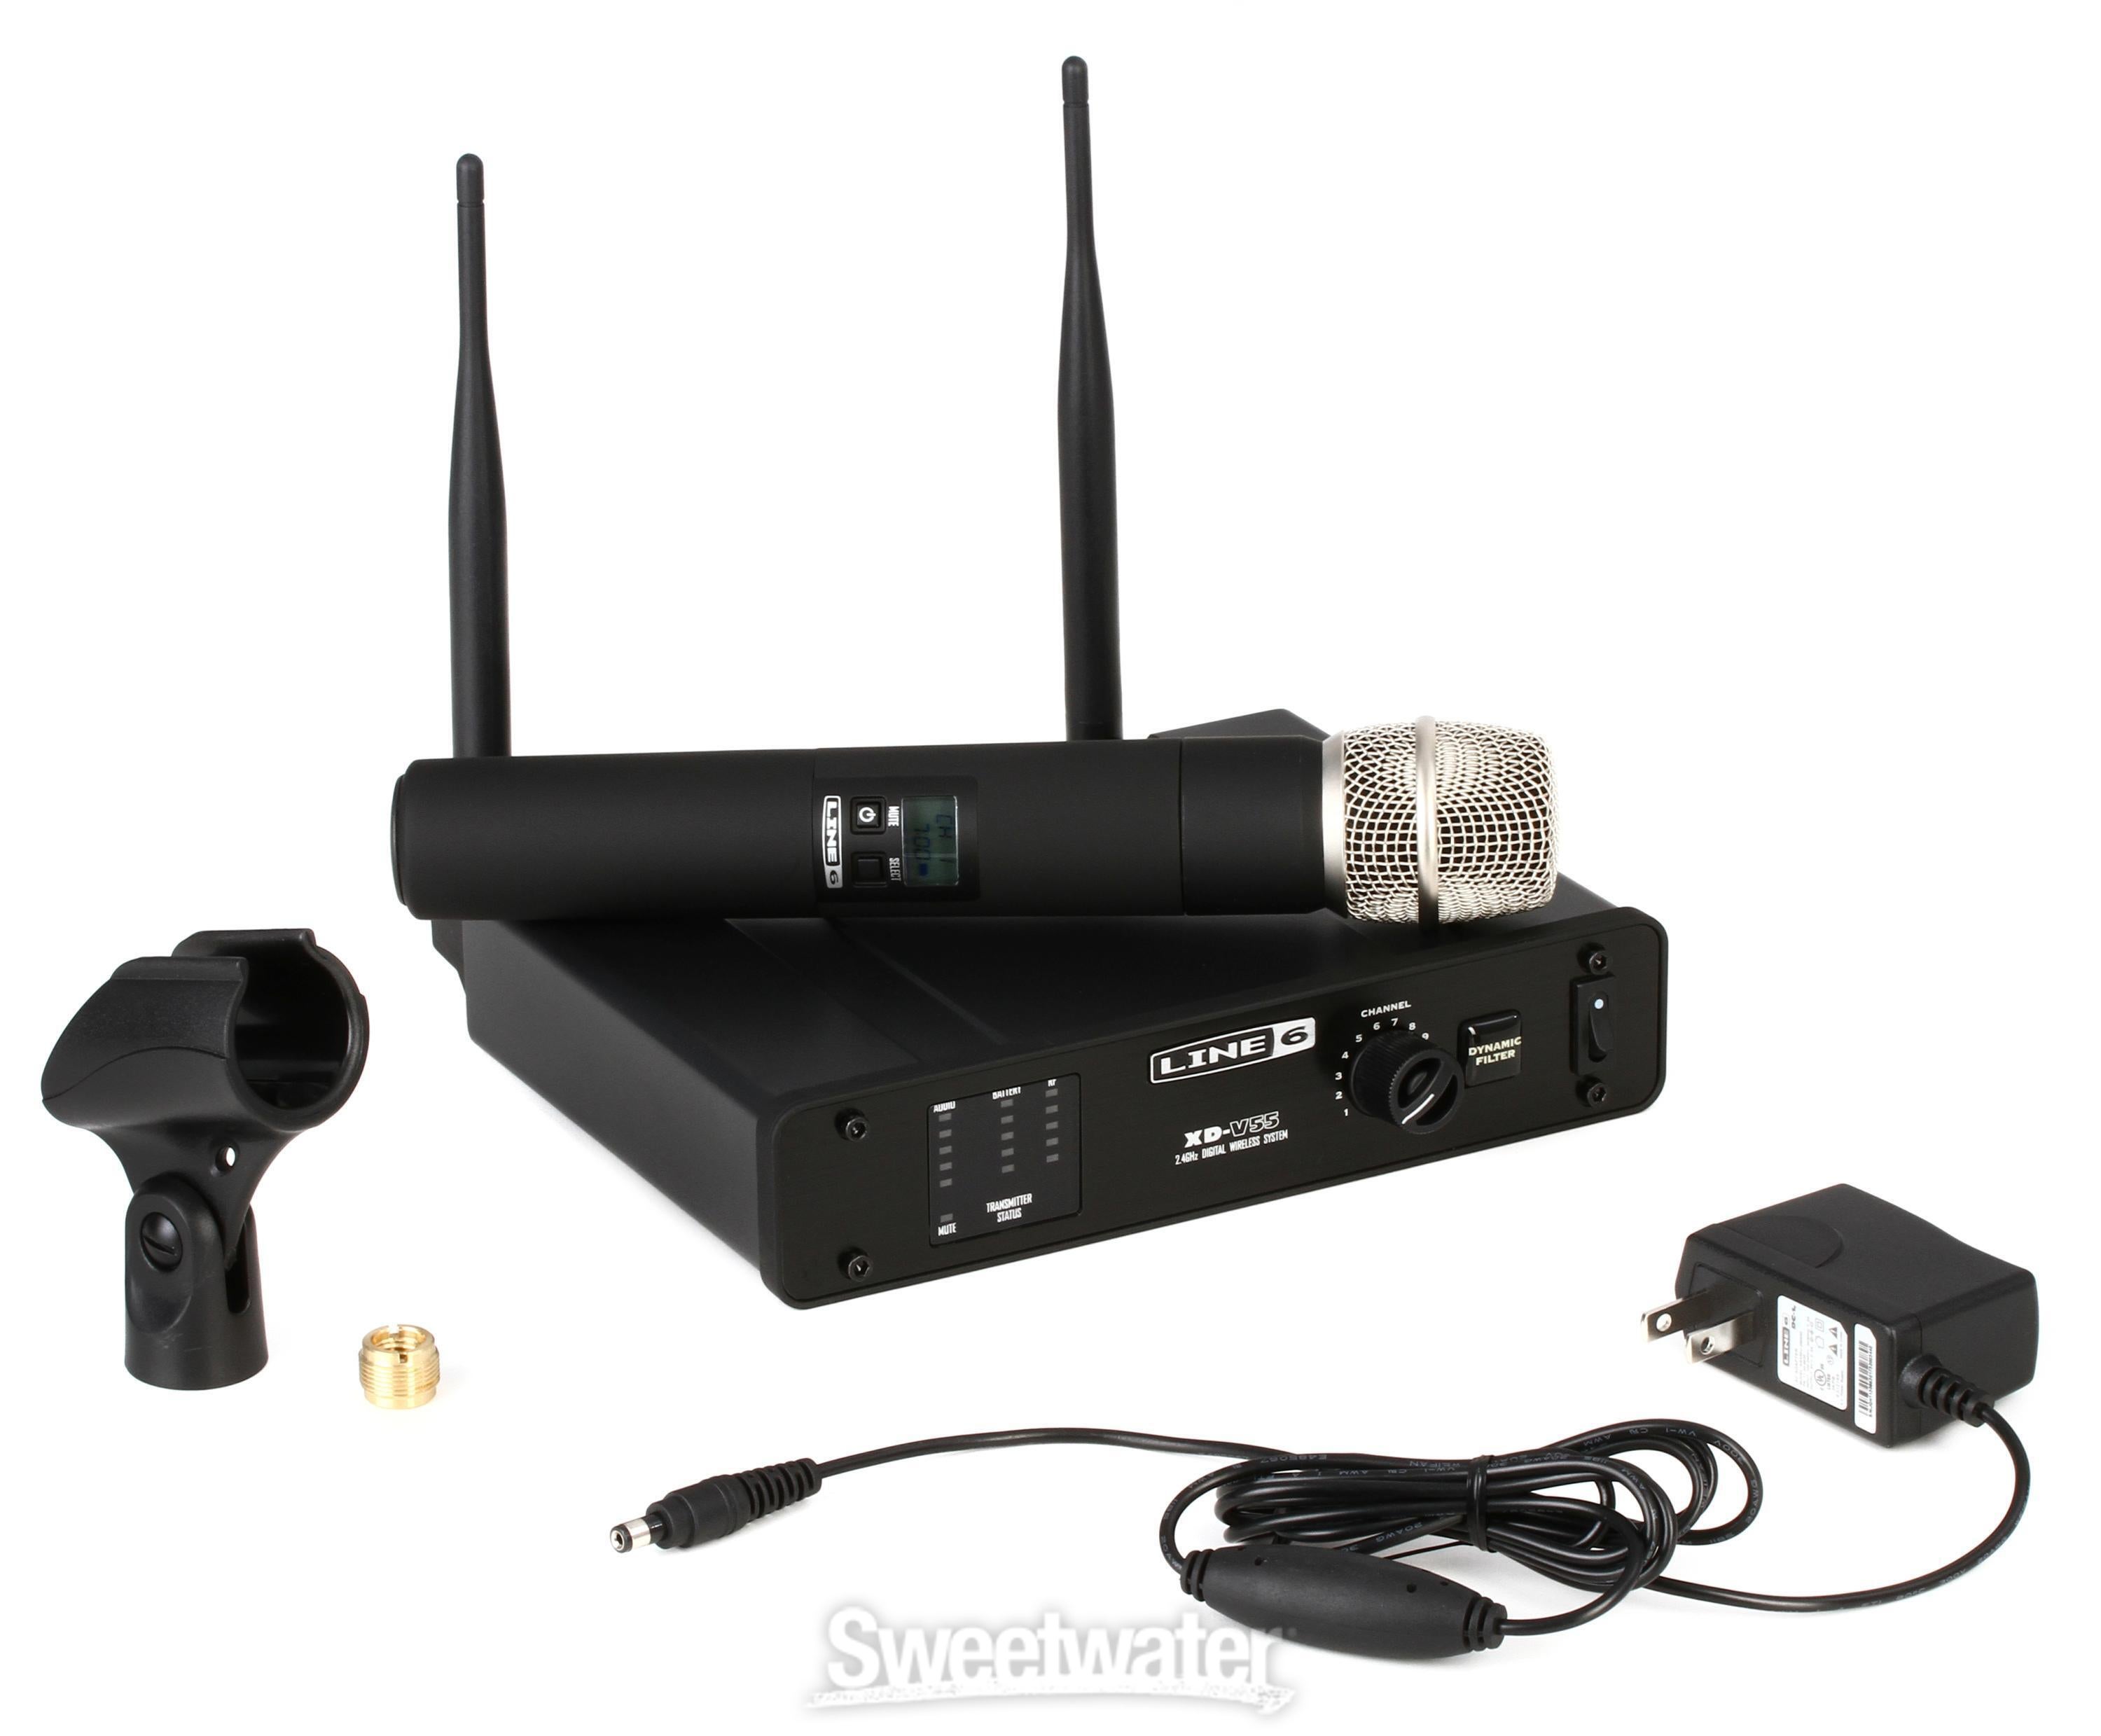 Line 6 XD-V55 Digital Wireless Handheld Microphone System | Sweetwater